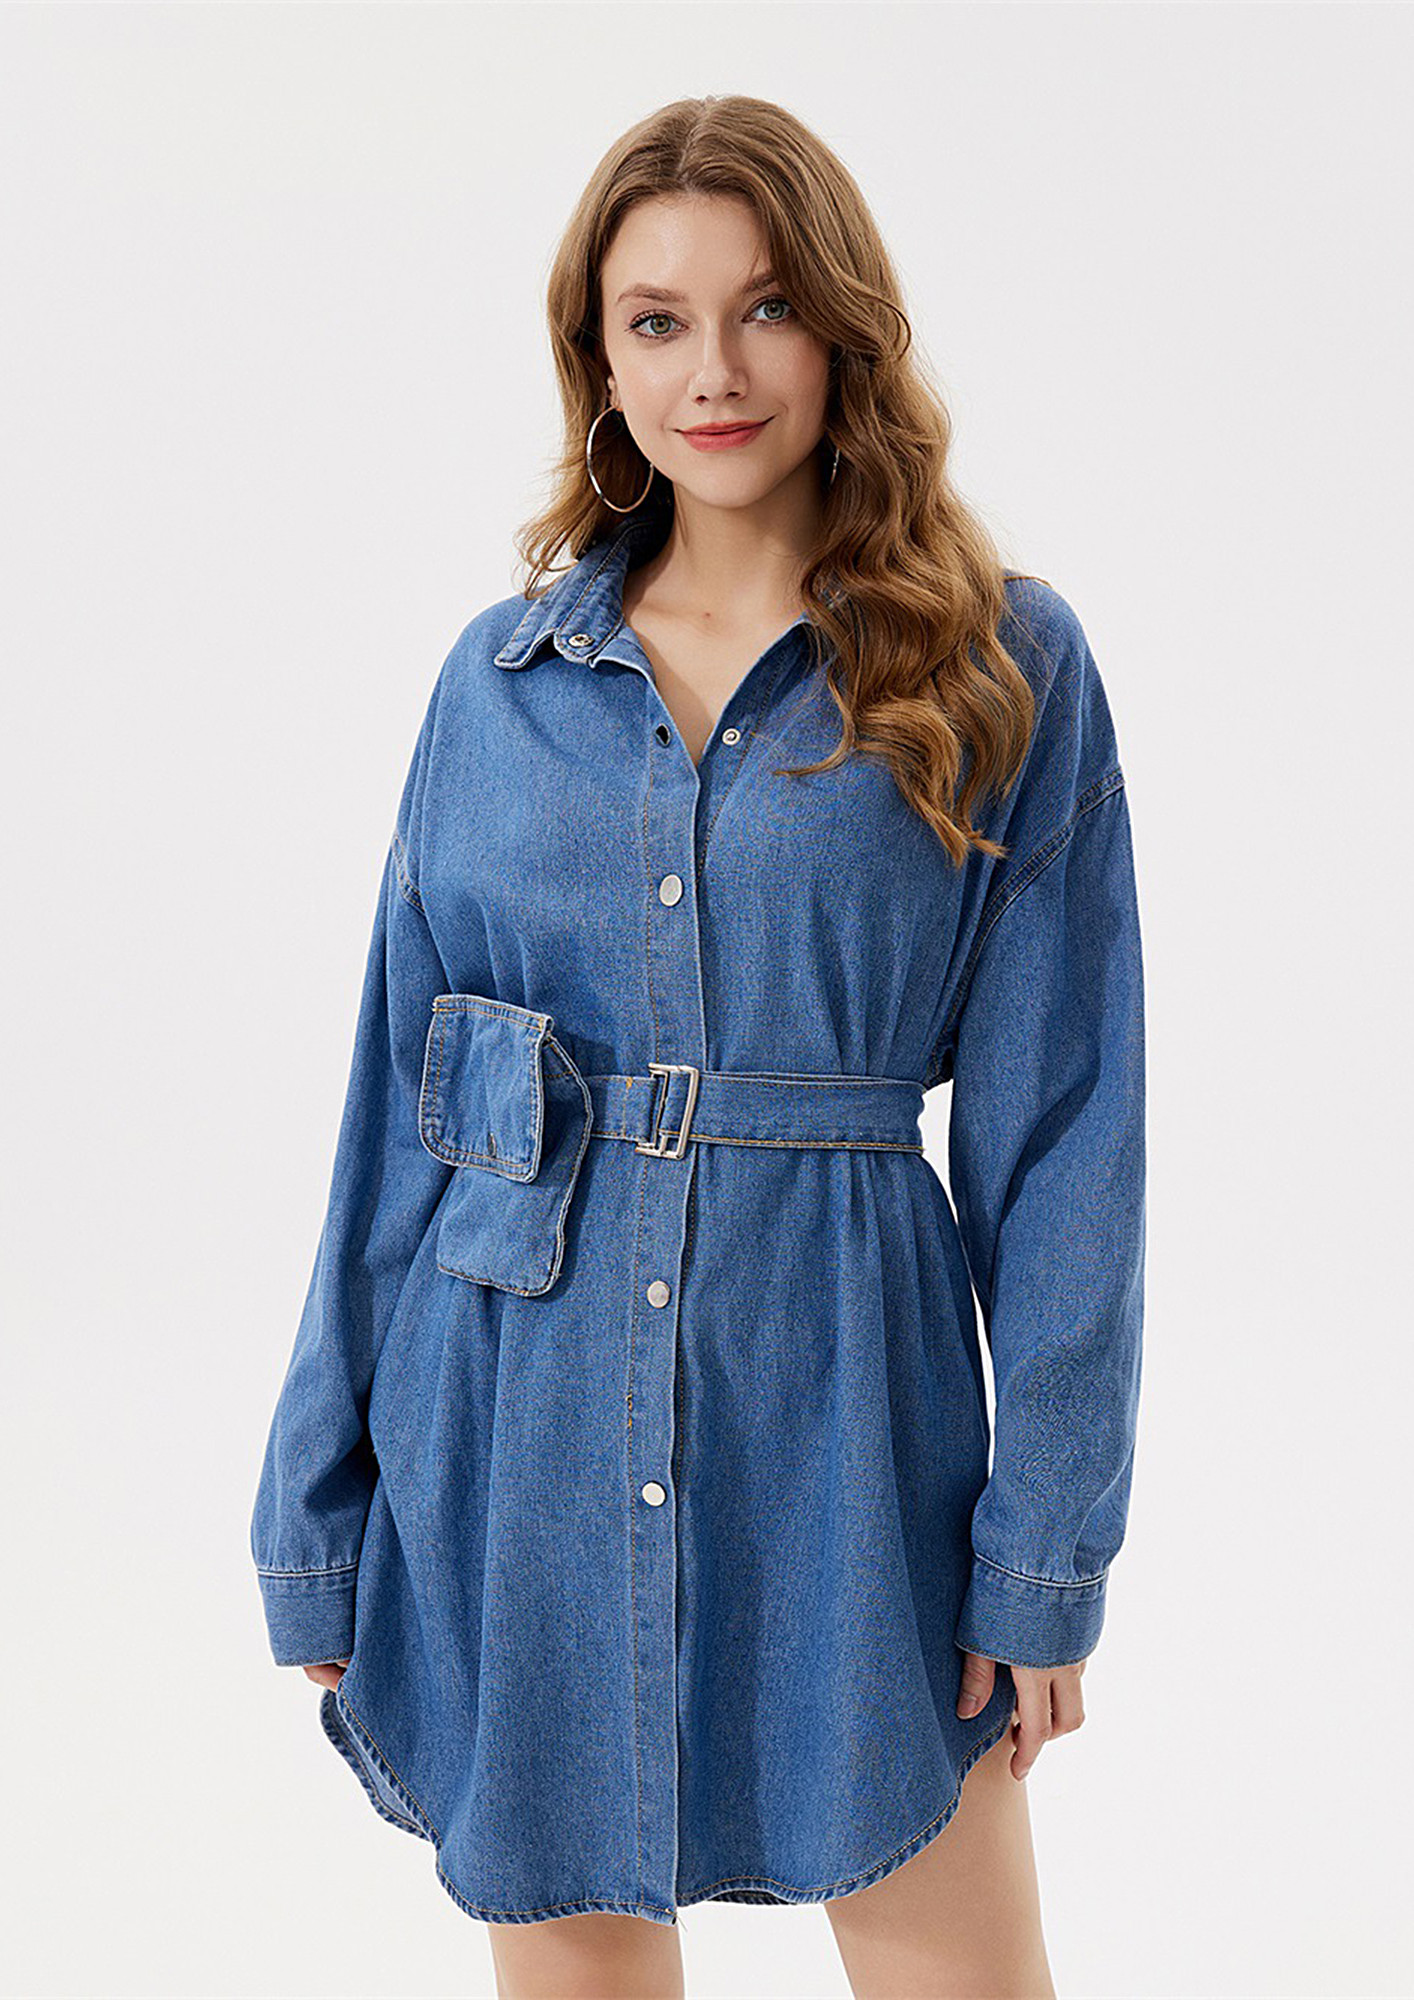 Buy Denim Shirts For Women Online In India At Best Price Offers | Tata CLiQ